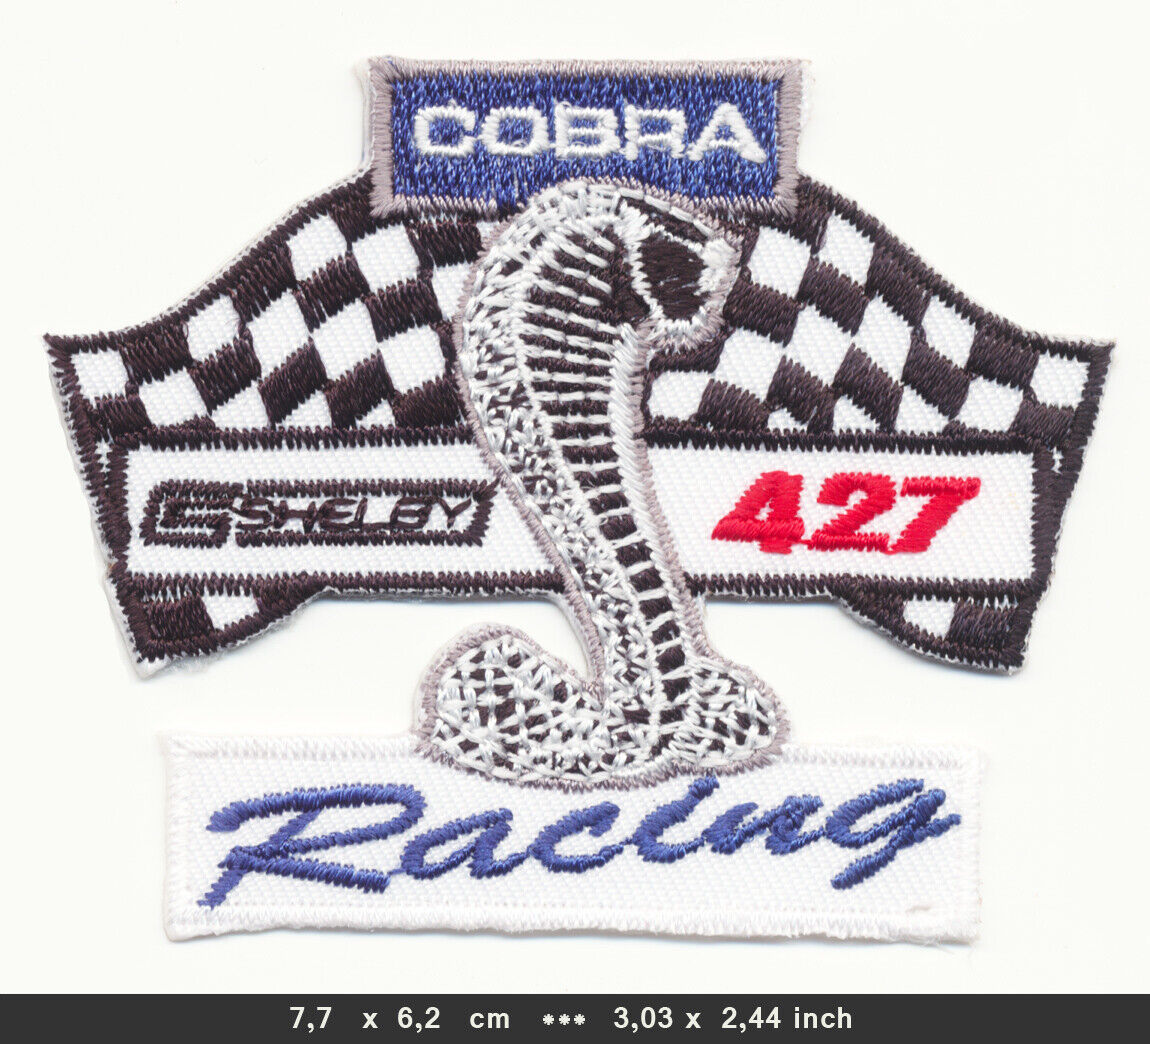 COBRA SHELBY 427 Patch Embroidered Sew Iron On Cars Sportscar Racing V8